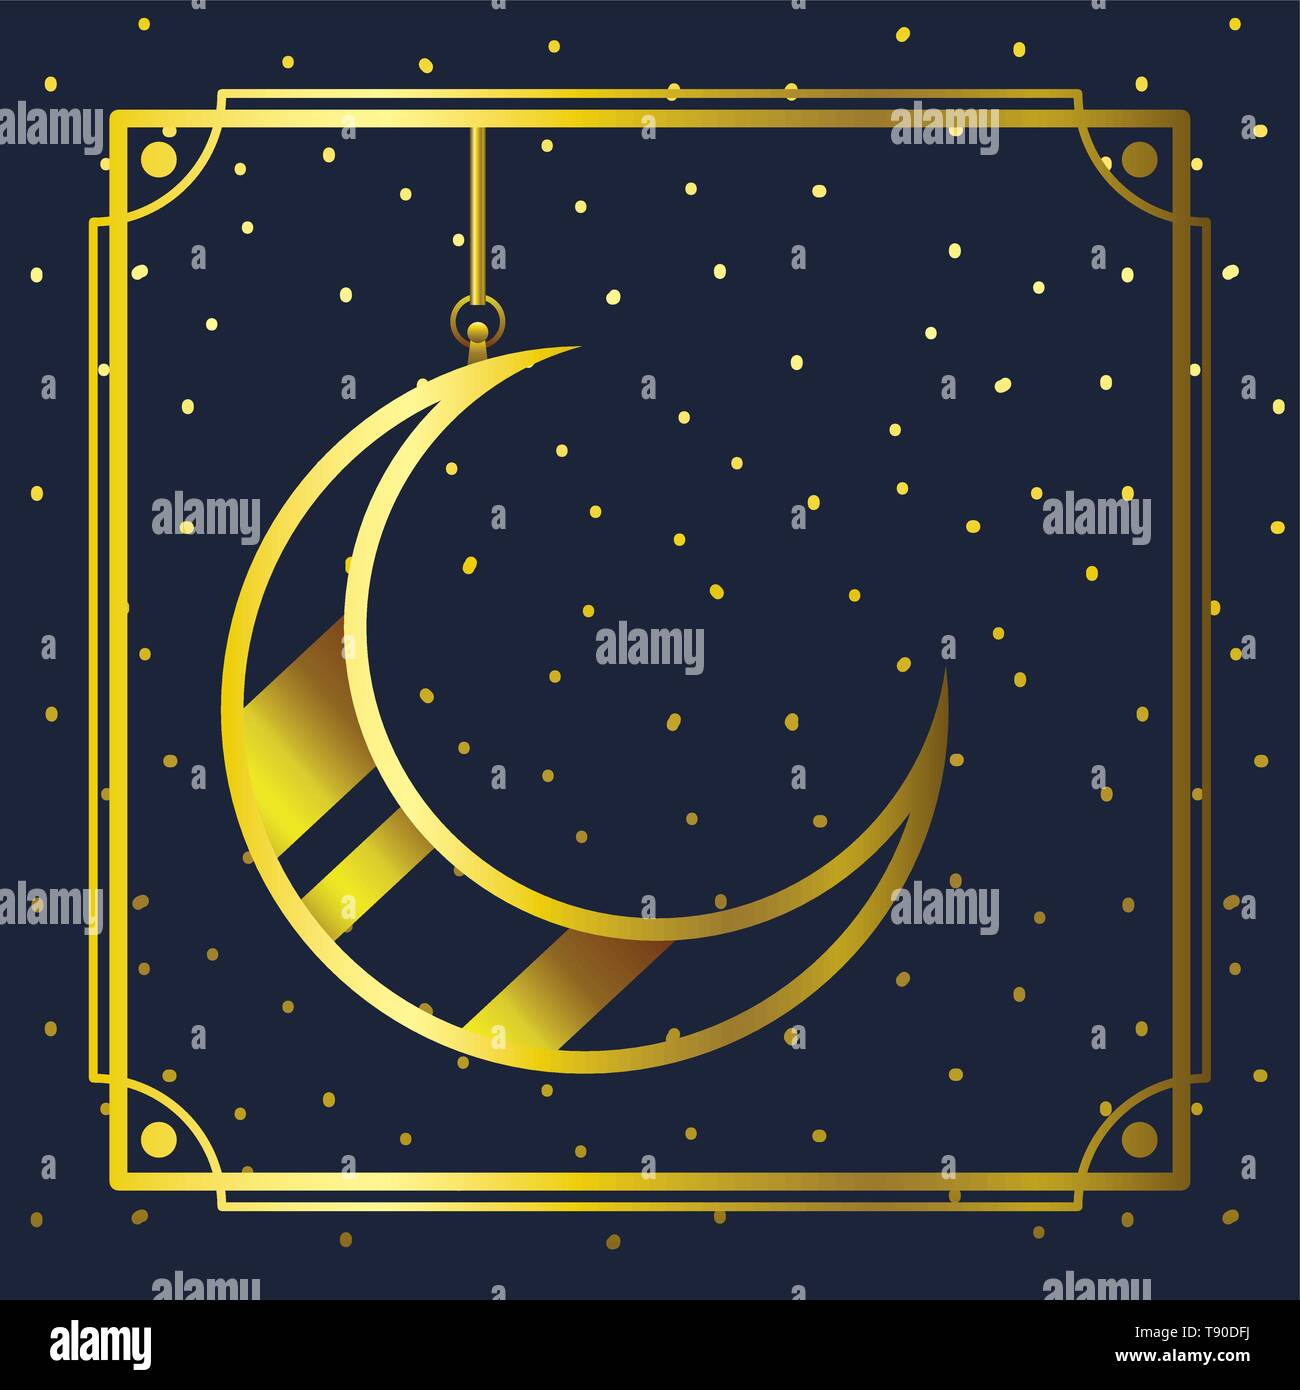 golden frame with moon crescent hanging Stock Vector